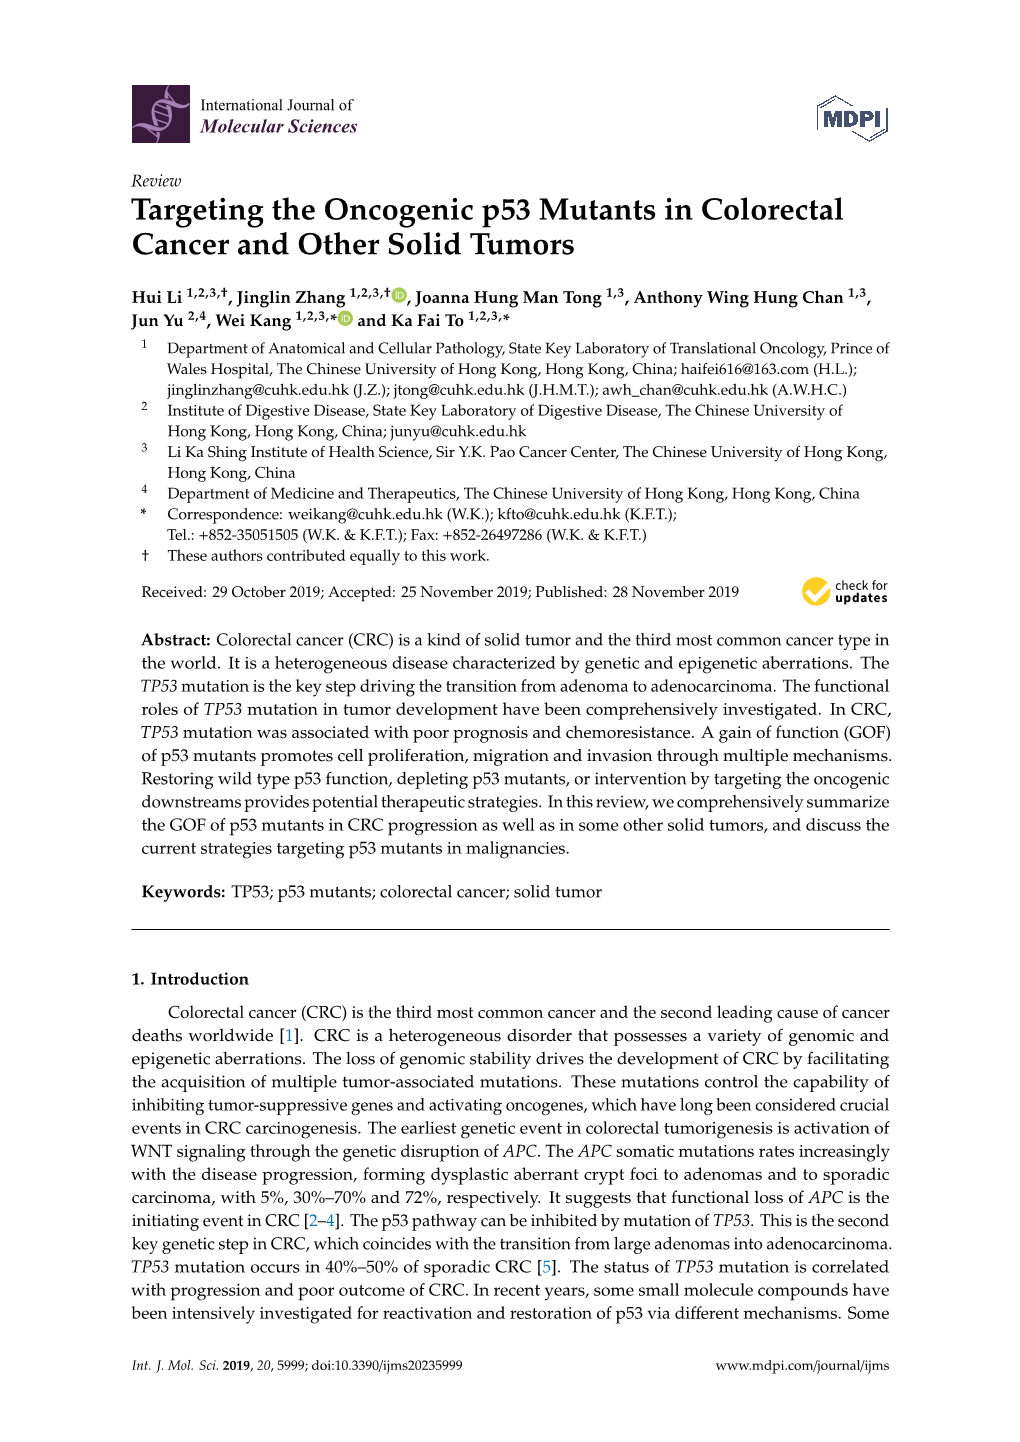 Targeting the Oncogenic P53 Mutants in Colorectal Cancer and Other Solid Tumors